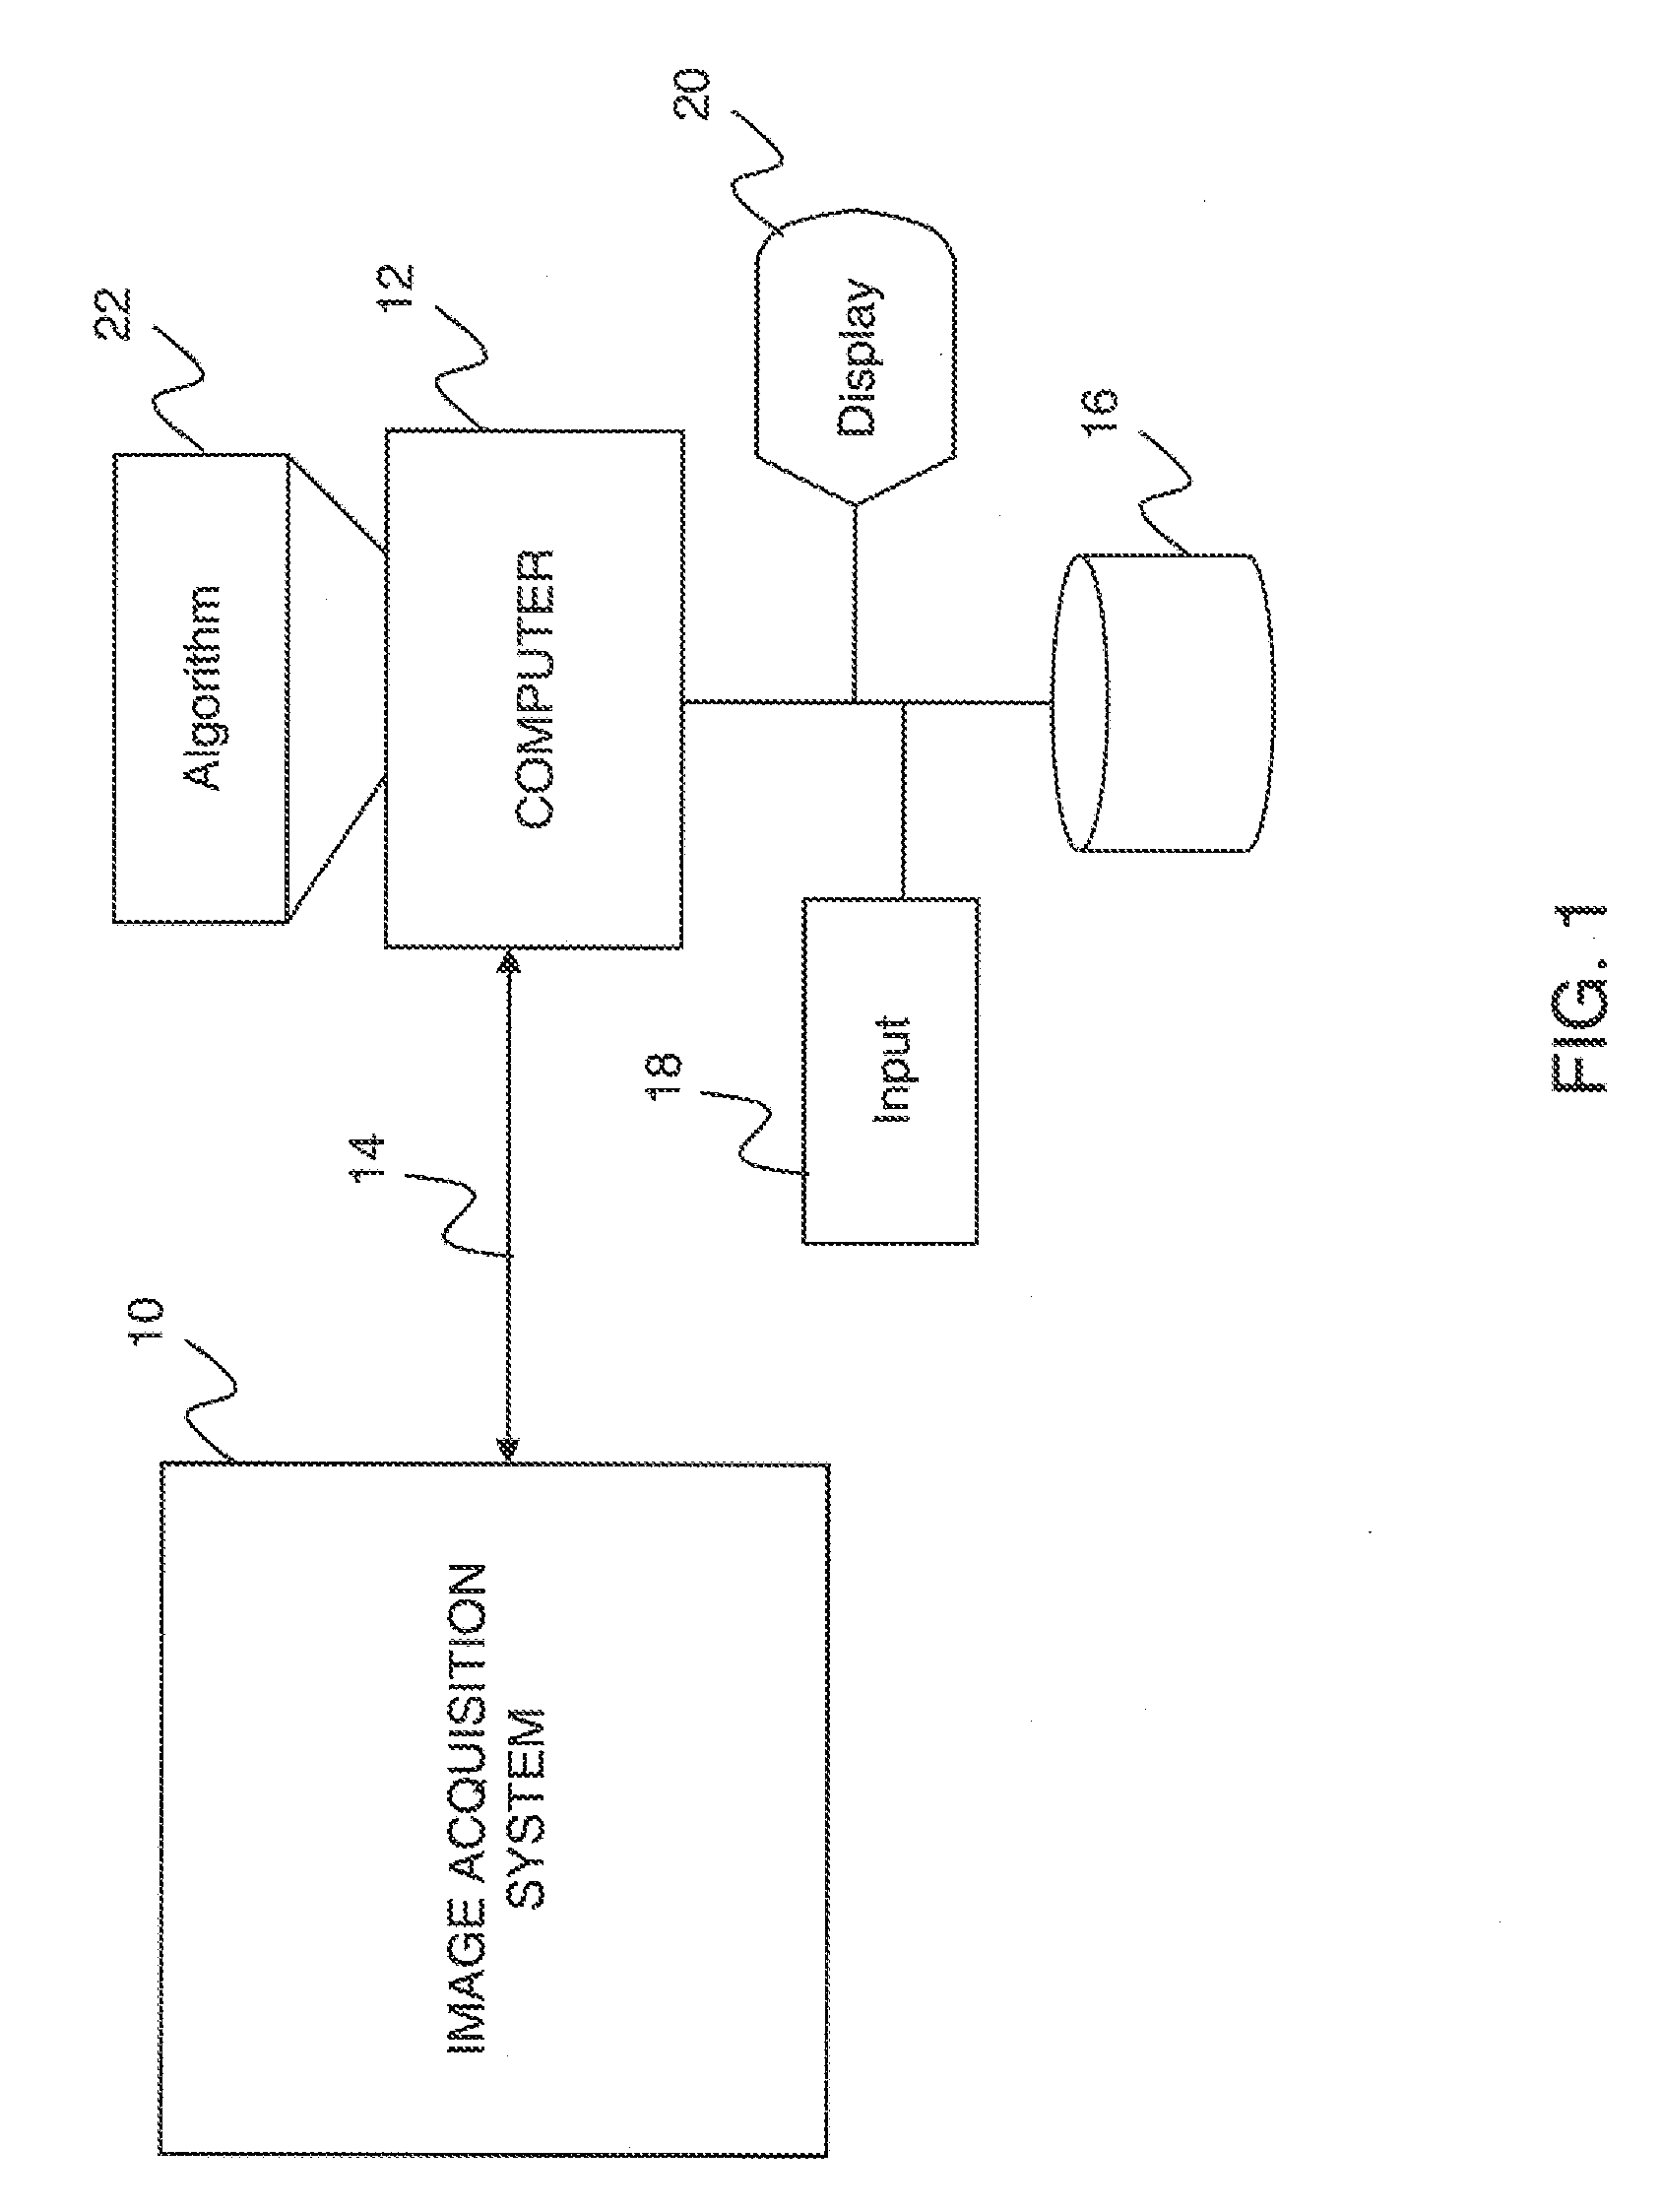 System and method for locating anatomies of interest in a 3D volume